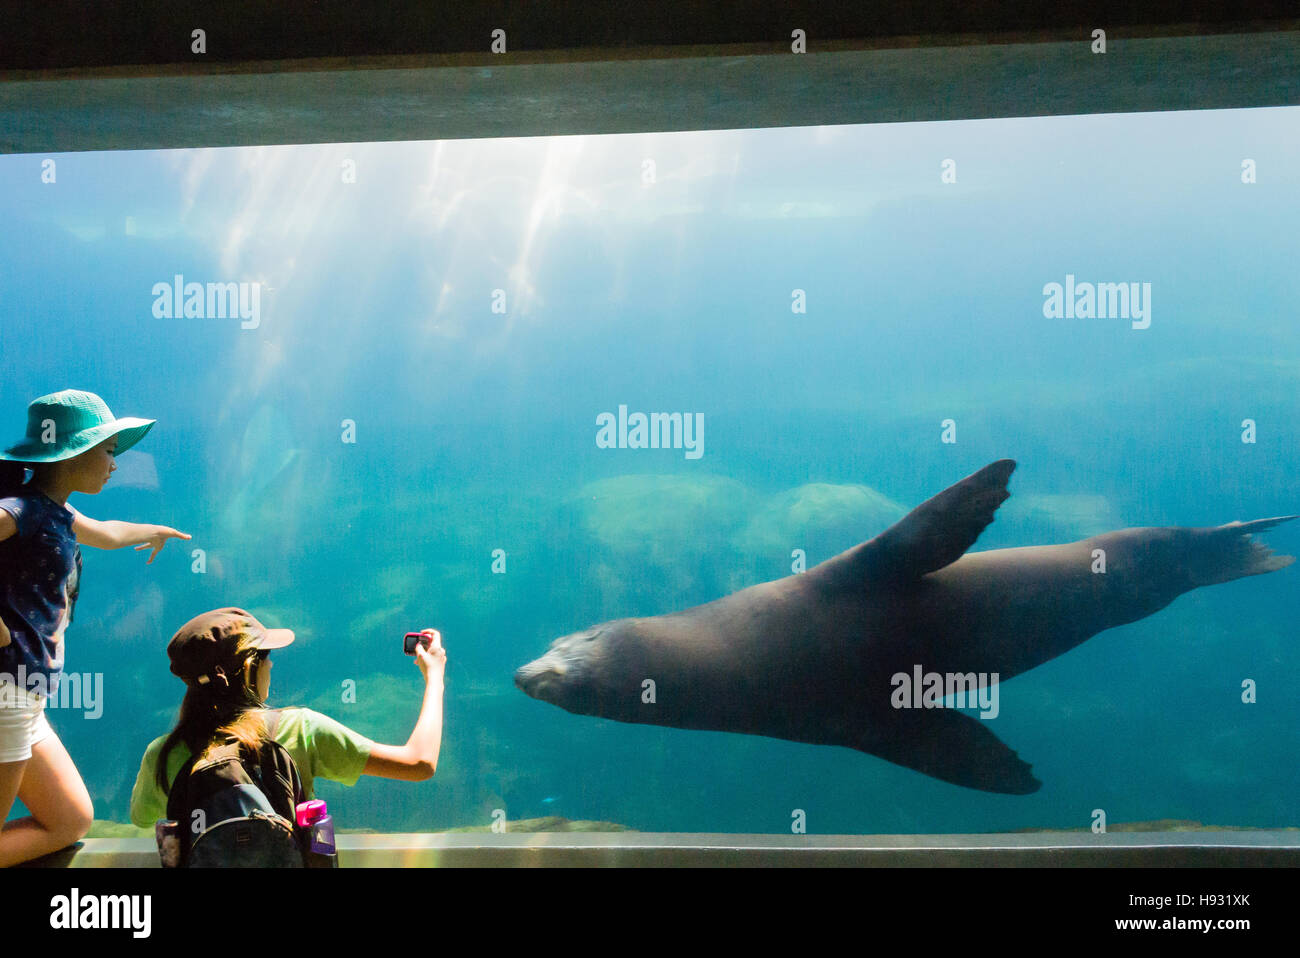 Children reach out to touch aquarium tank glass as seal swims by. Stock Photo